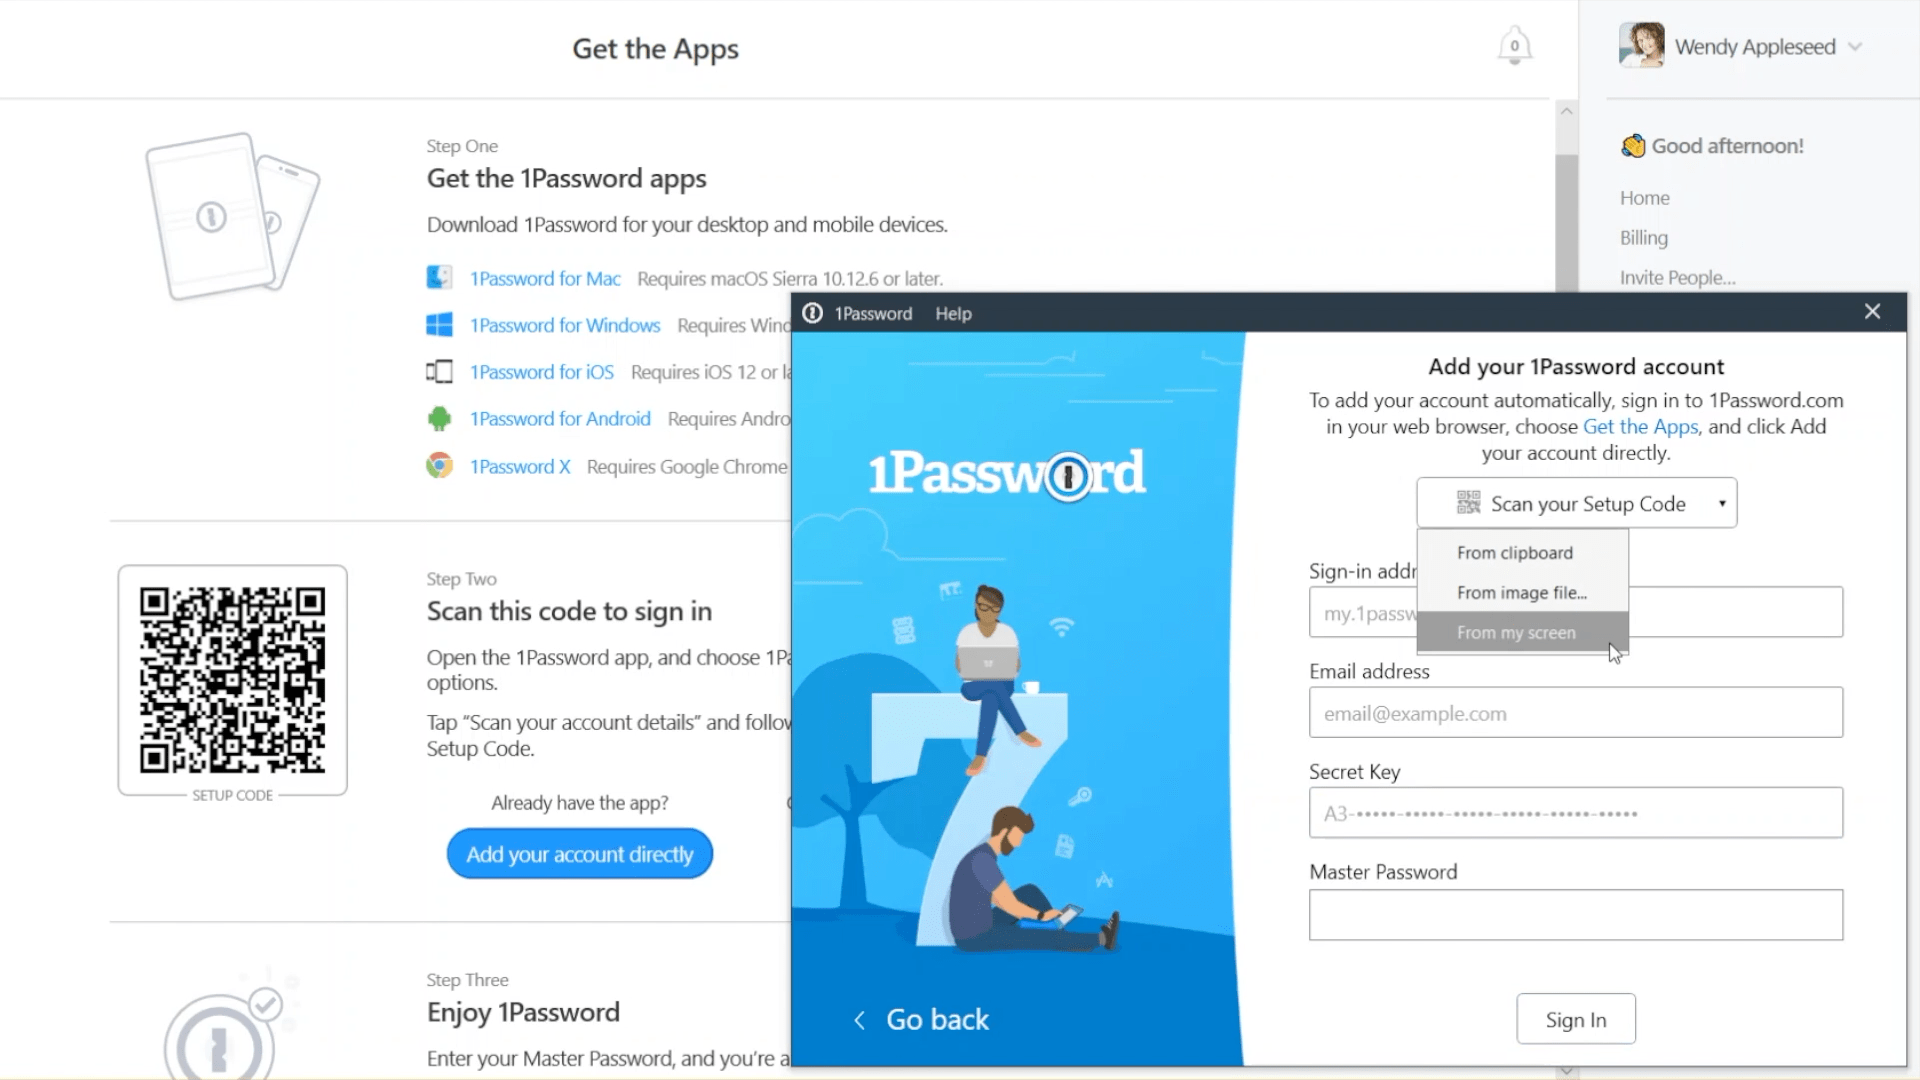 password management, best password manager, password manager chrome, password manager ios, password manager google, password manager android, password manager reviews